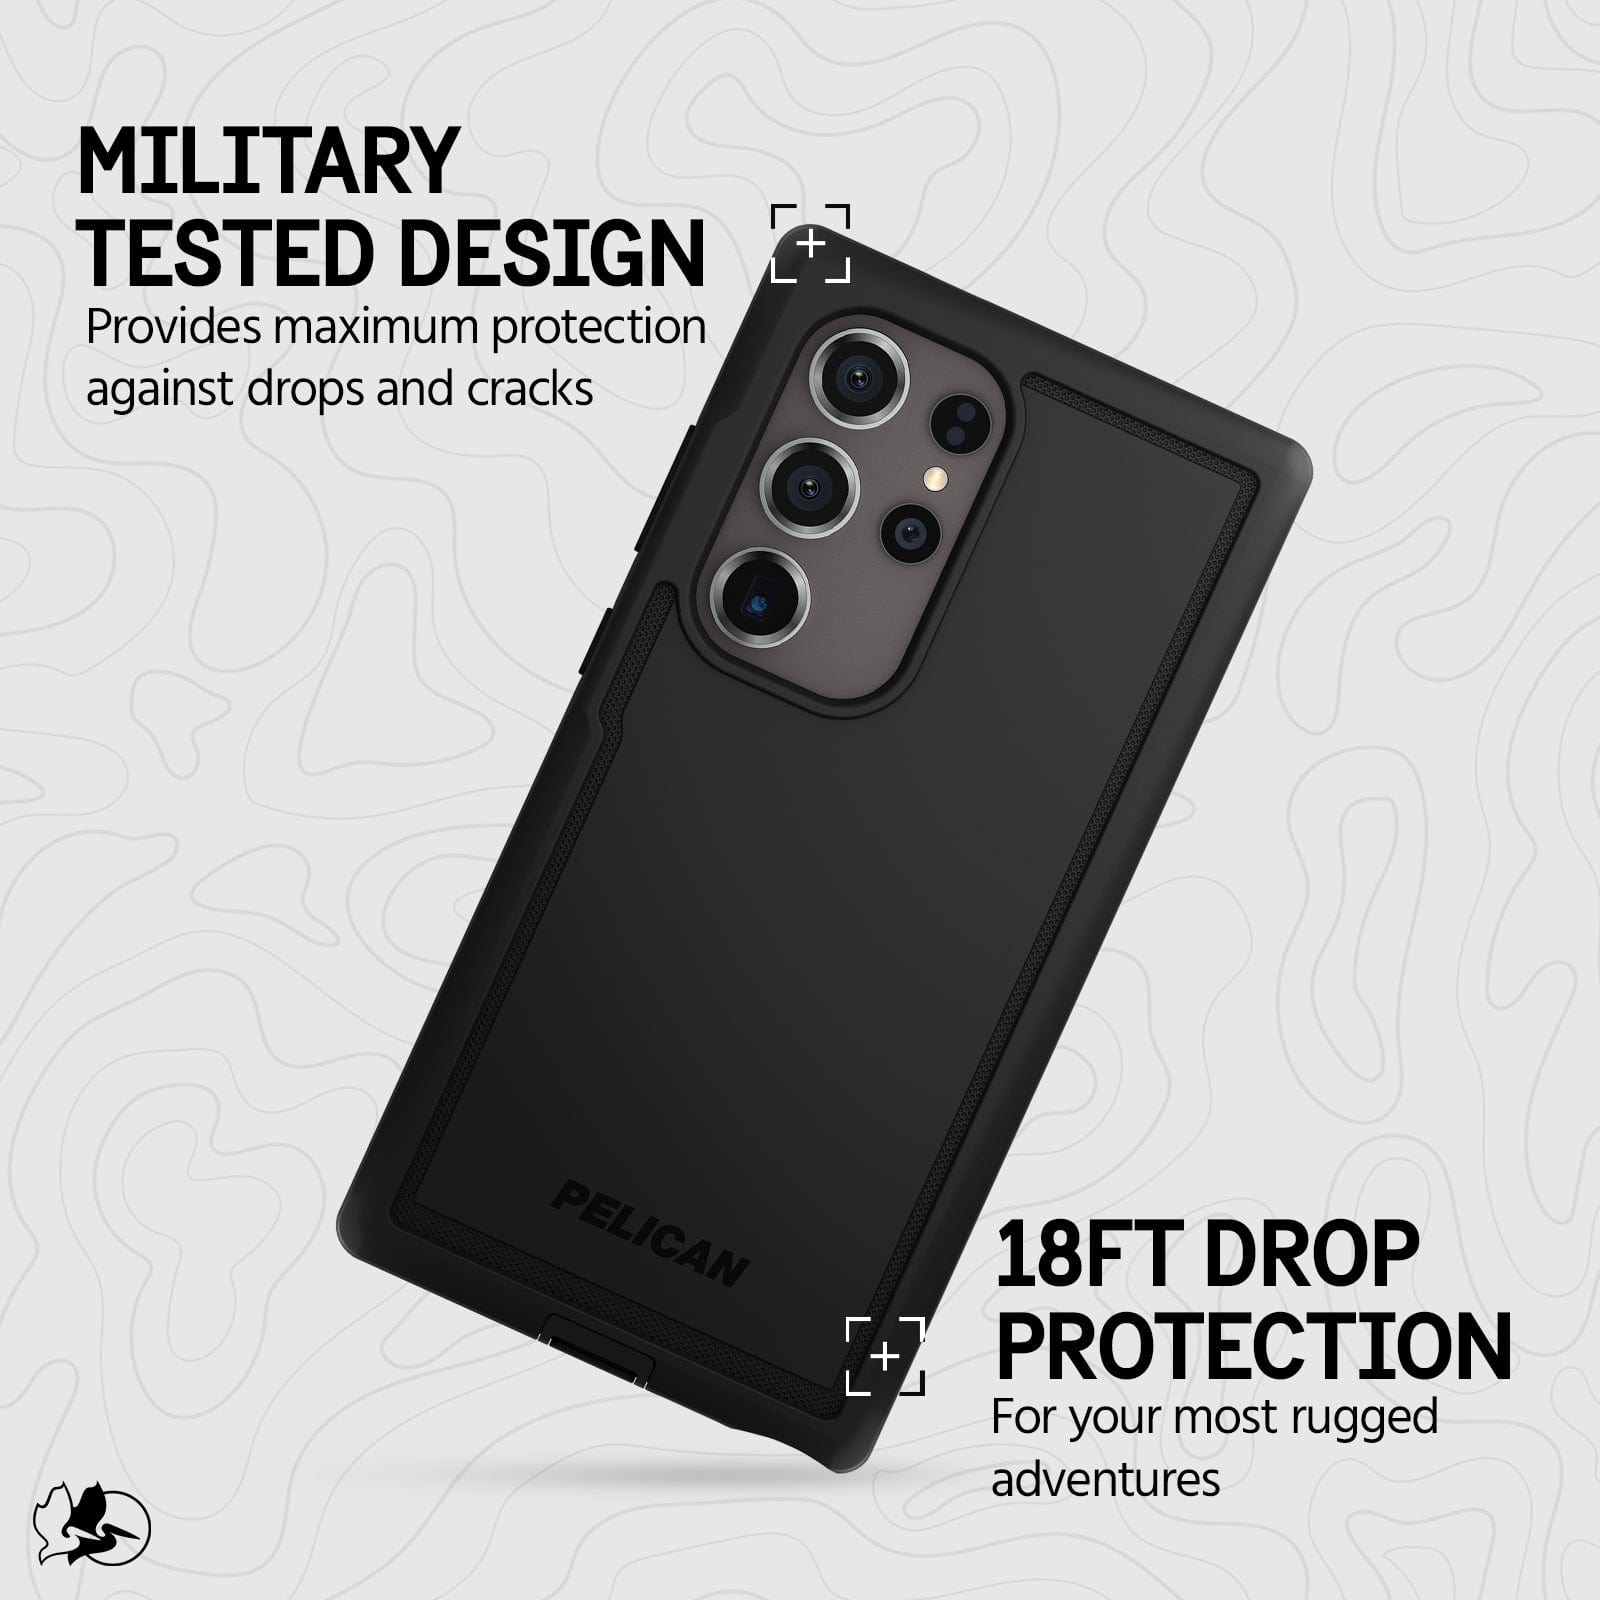 MILITARY TESTED DESIGN. PROVIDES MAXIMUM PROTECTION AGAINST DROPS AND CRACKS. 18FT DROP PROTECTION FOR YOUR MOST RUGGED ADVENTURES